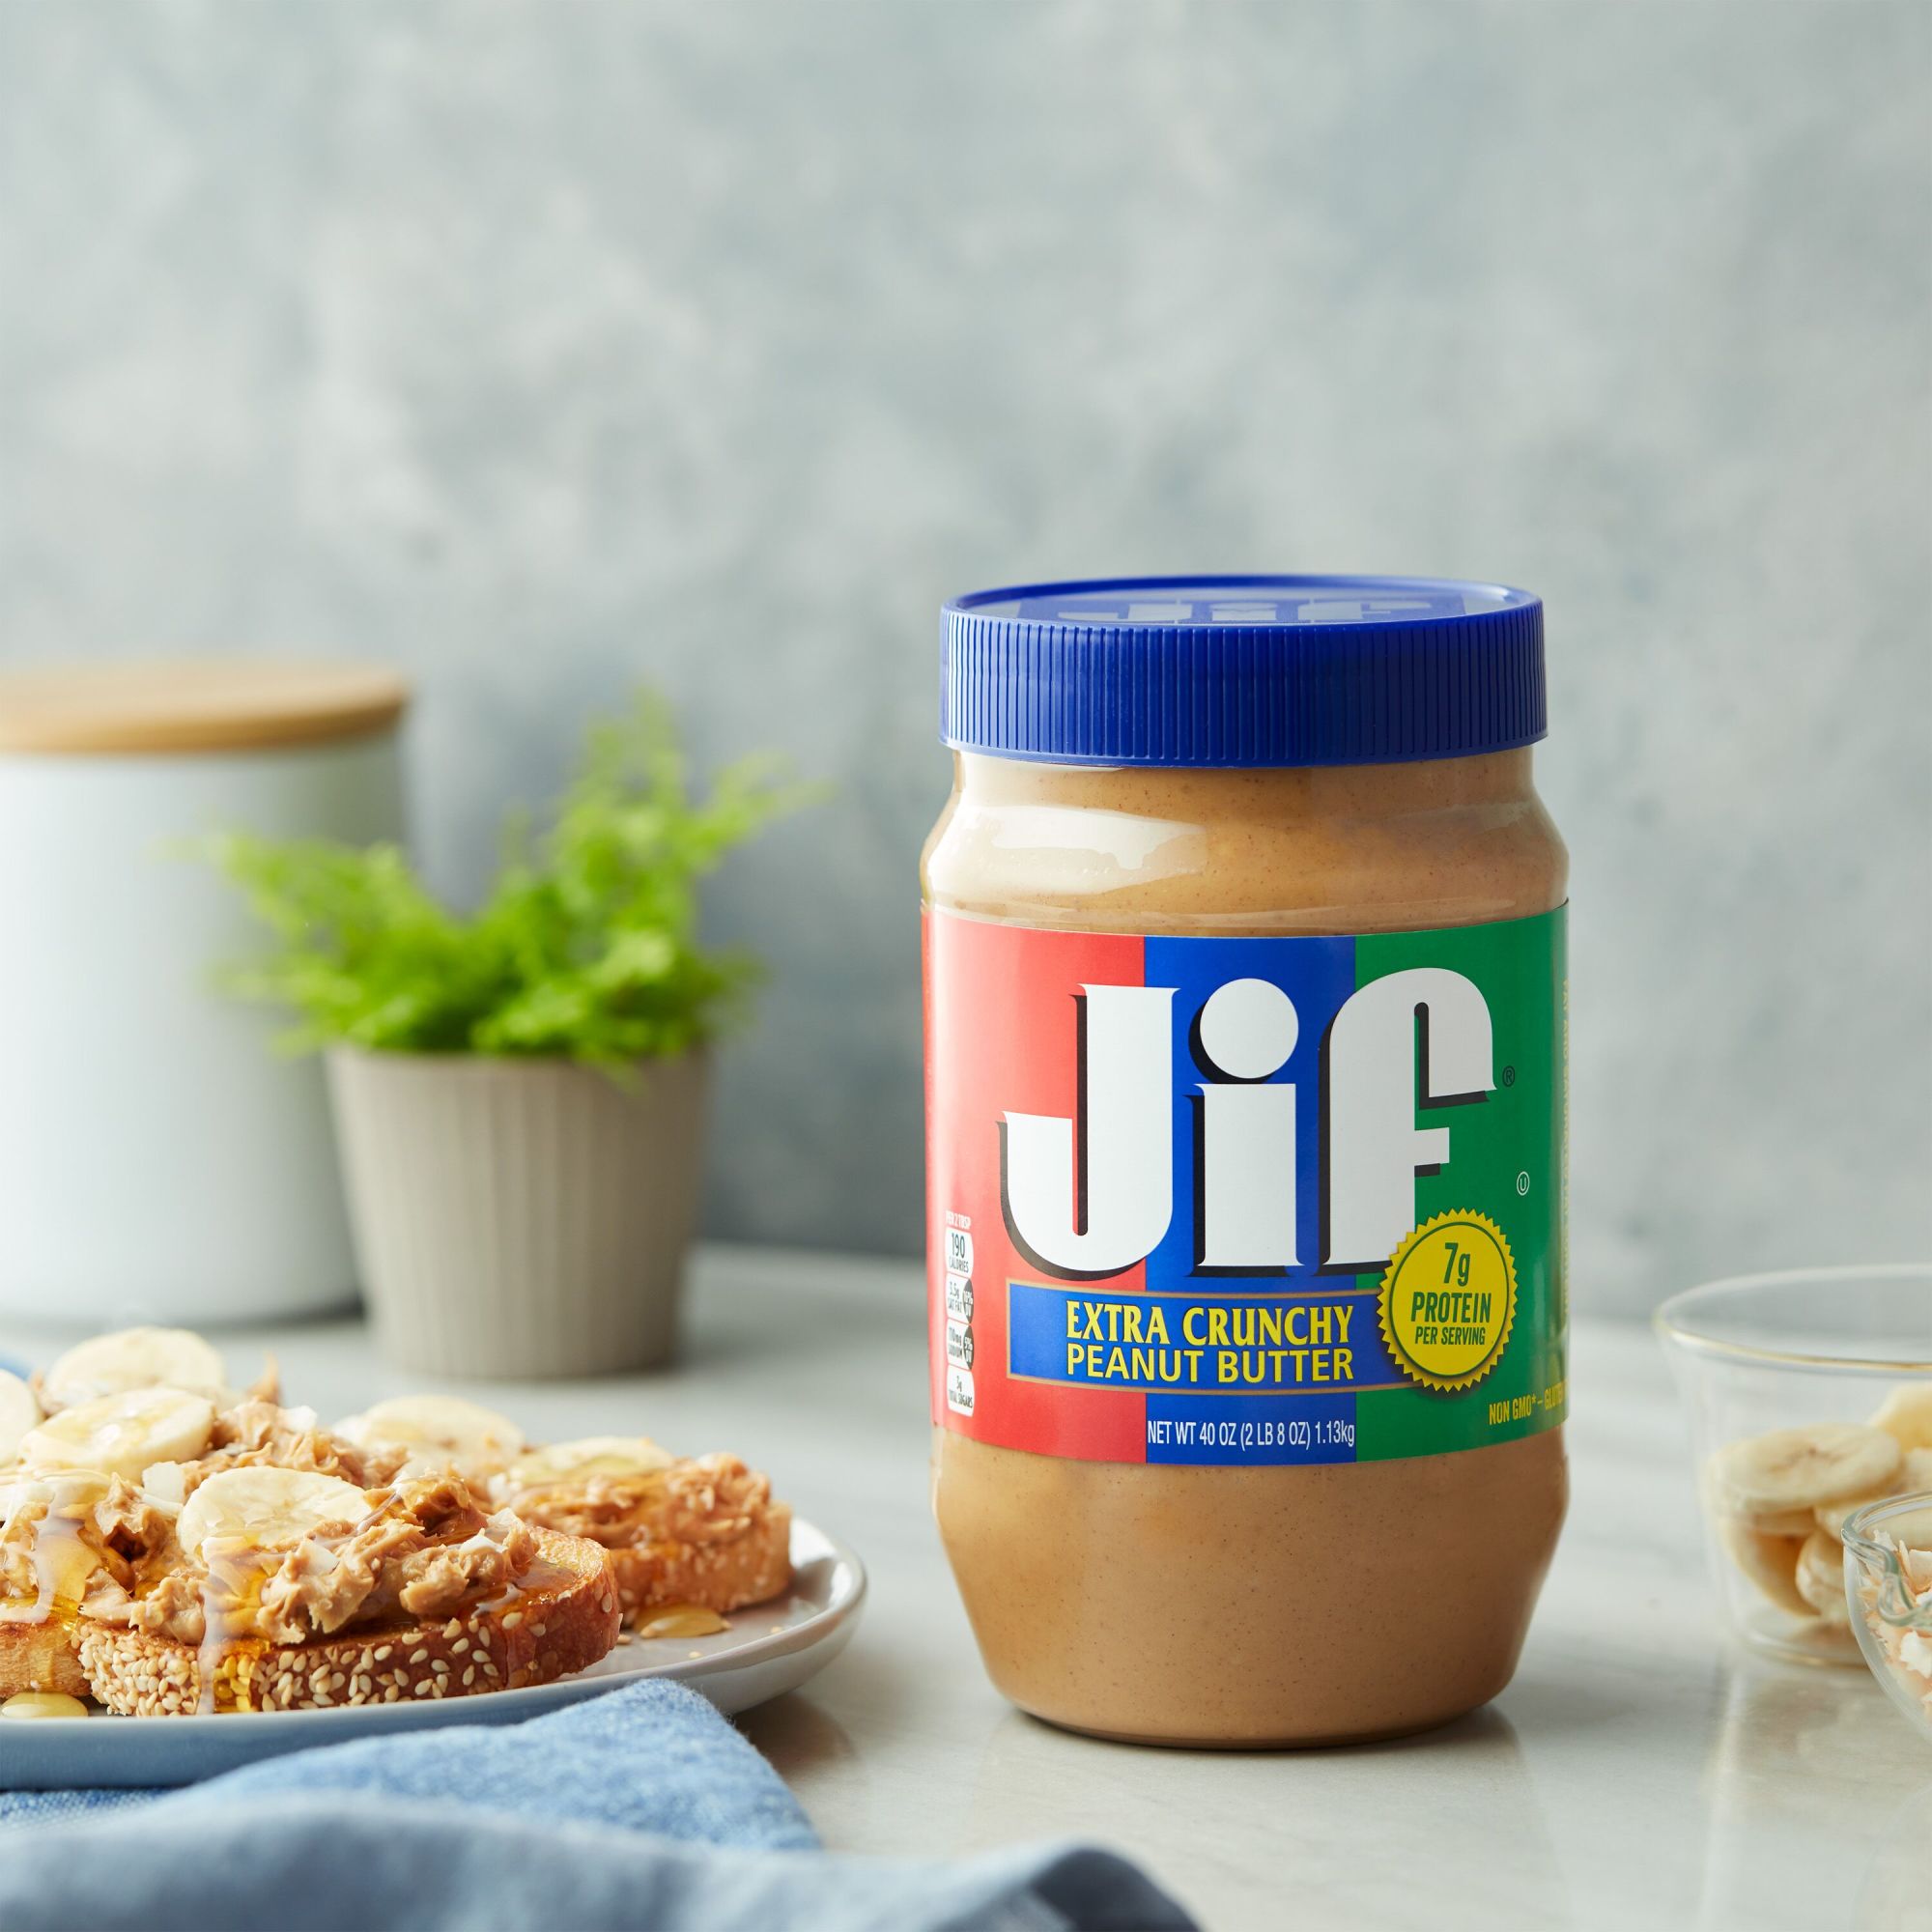 Jif Extra Crunchy Peanut Butter, 40-Ounce Jar - image 4 of 8